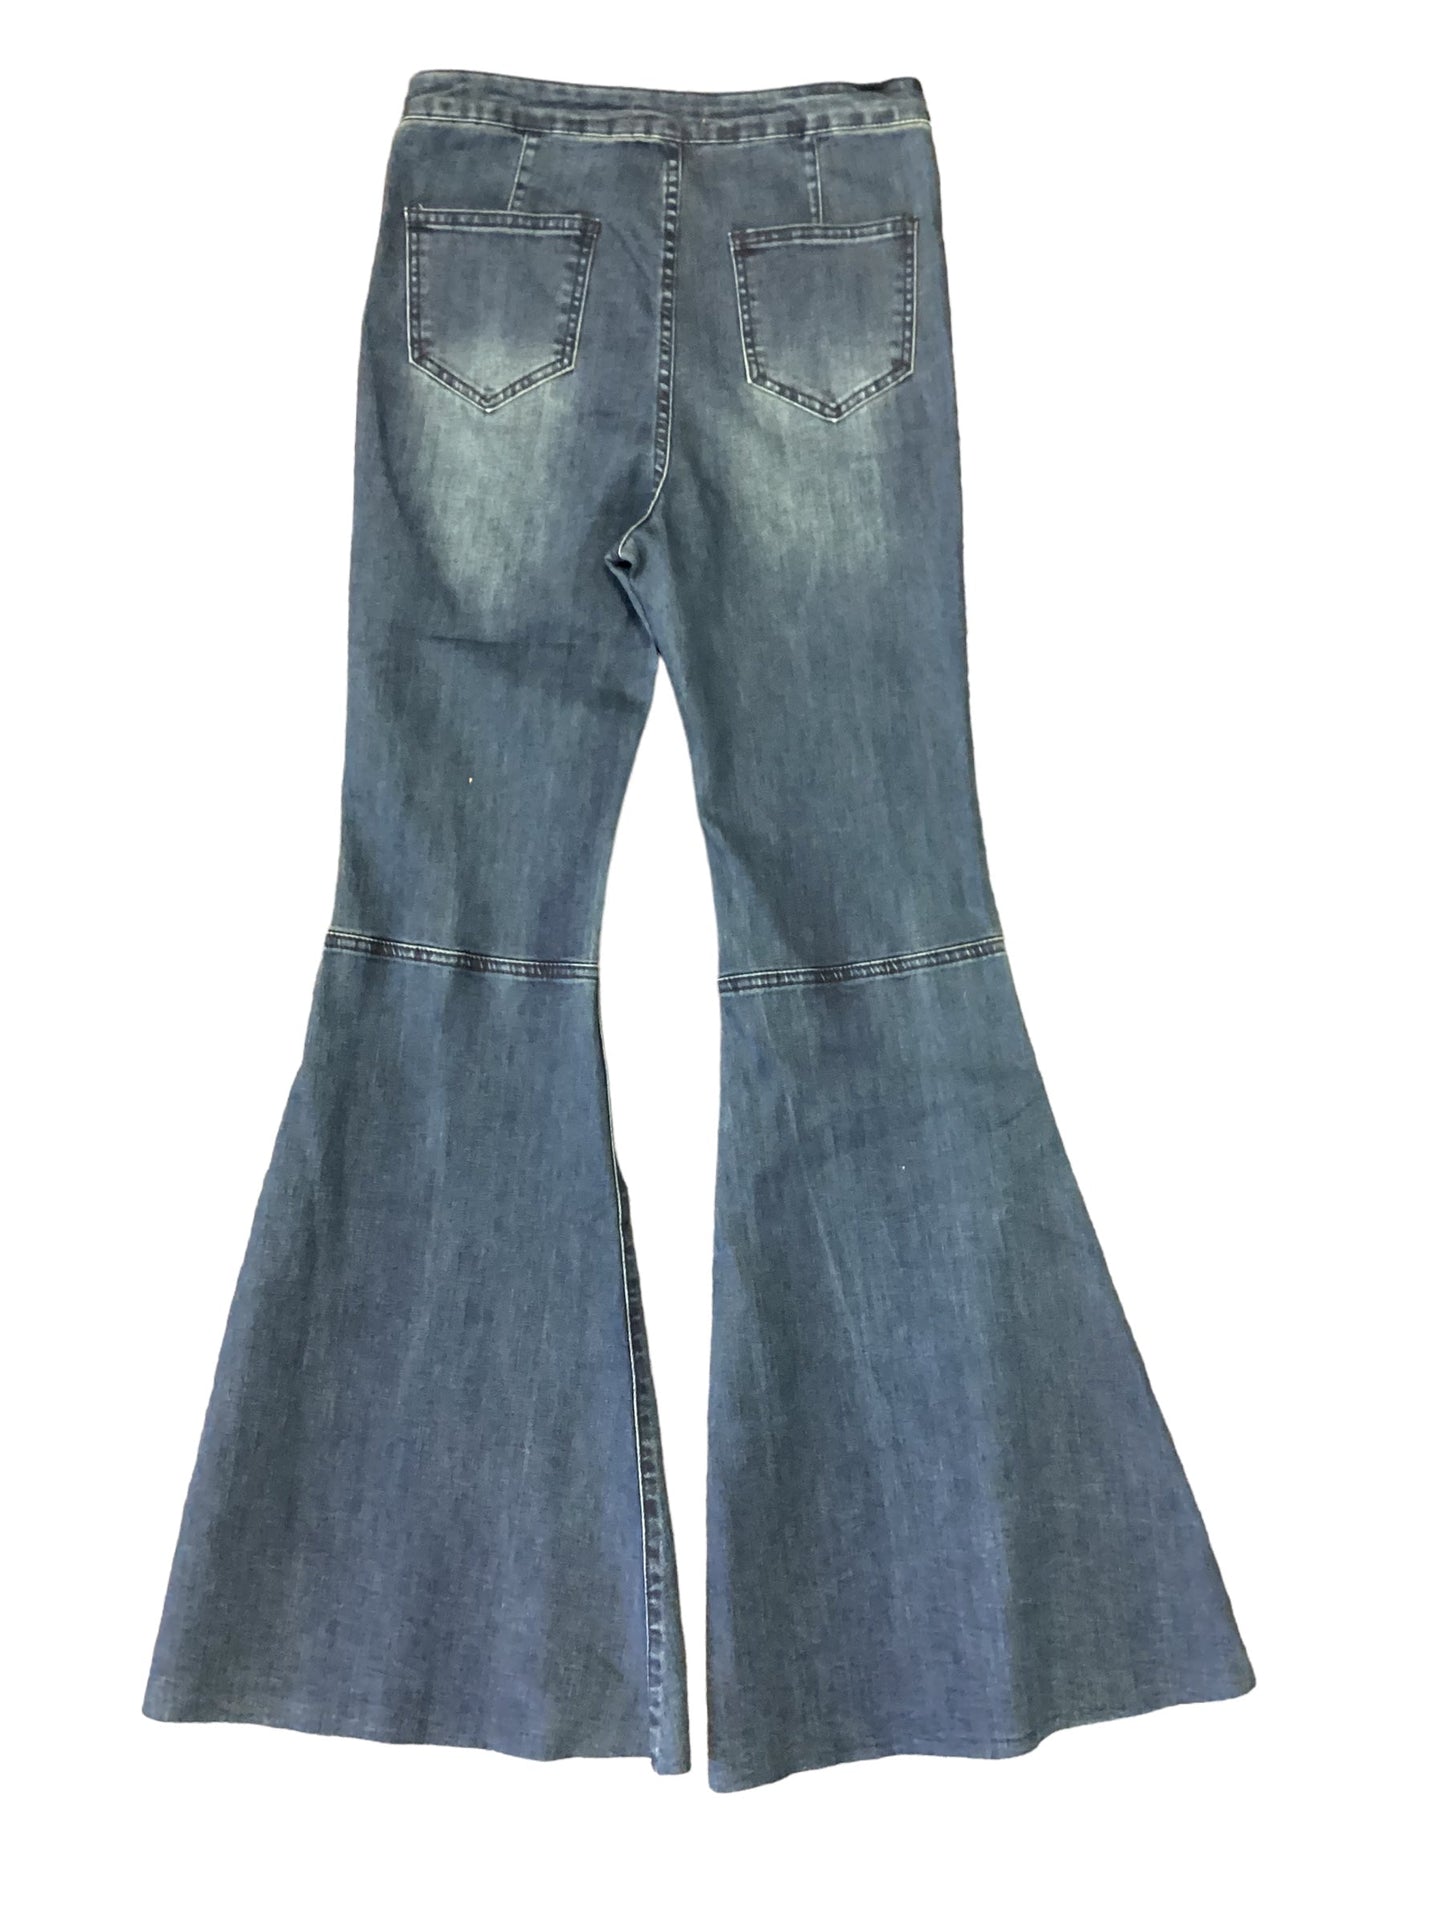 Jeans Flared By Cmc  Size: L